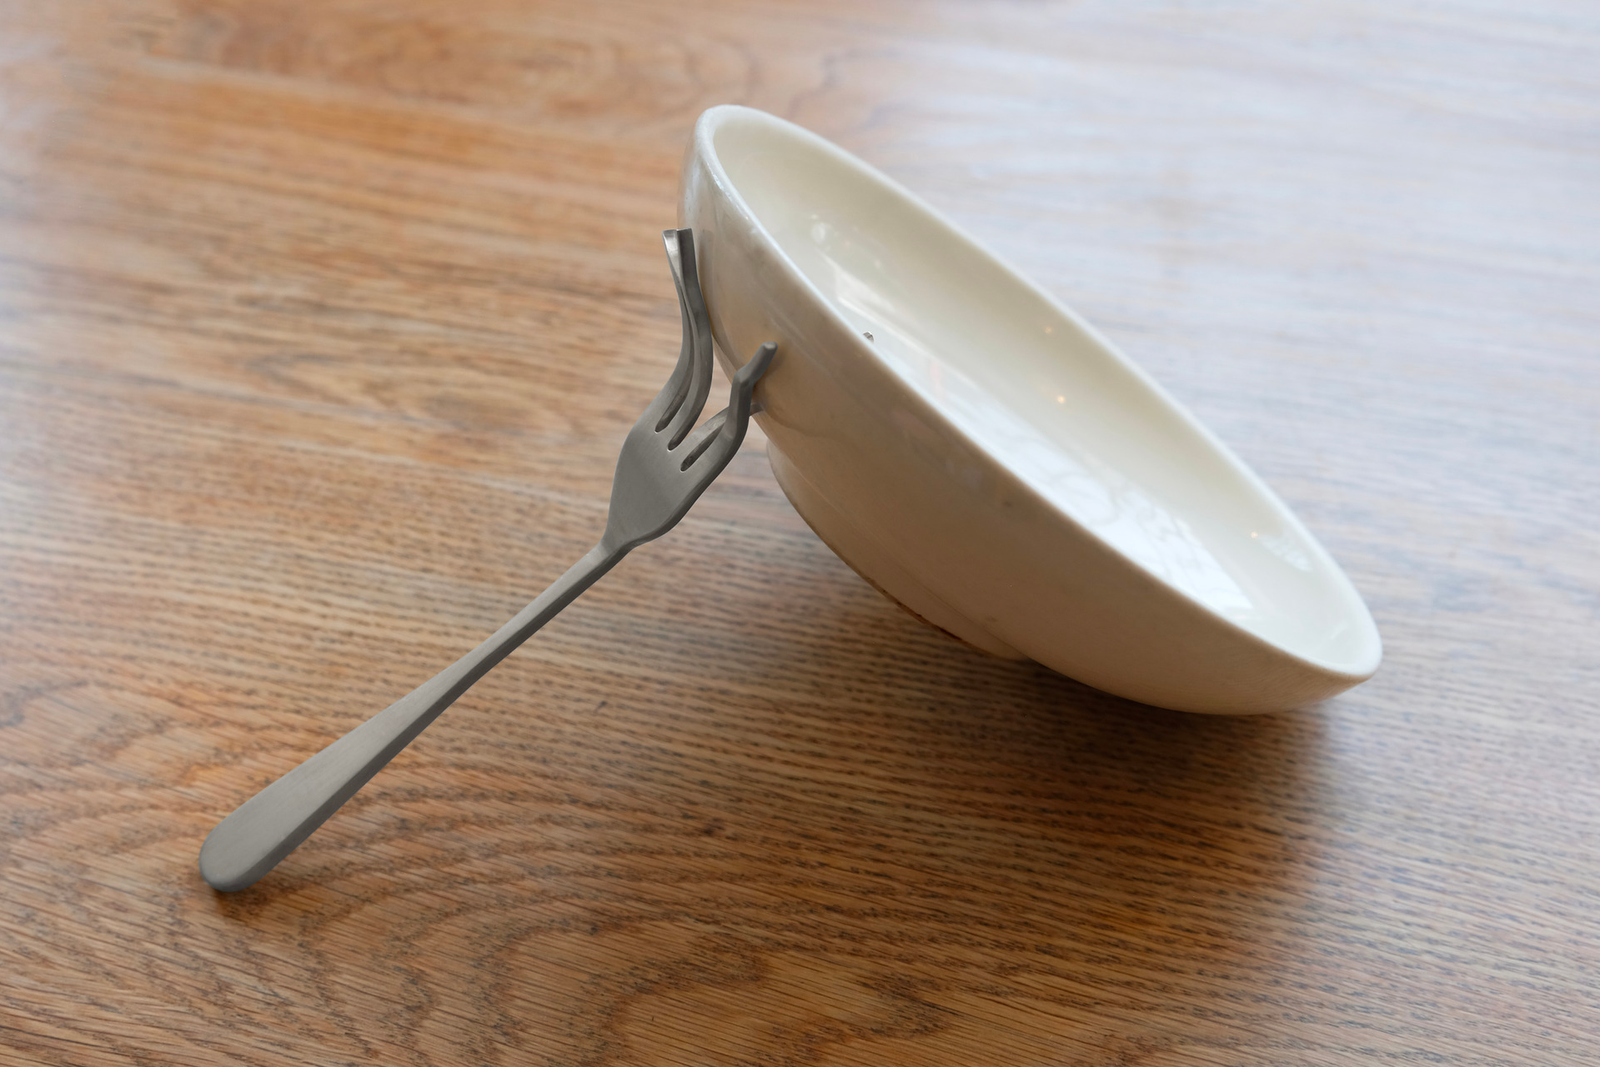 a fork crashing into a bowl from the side